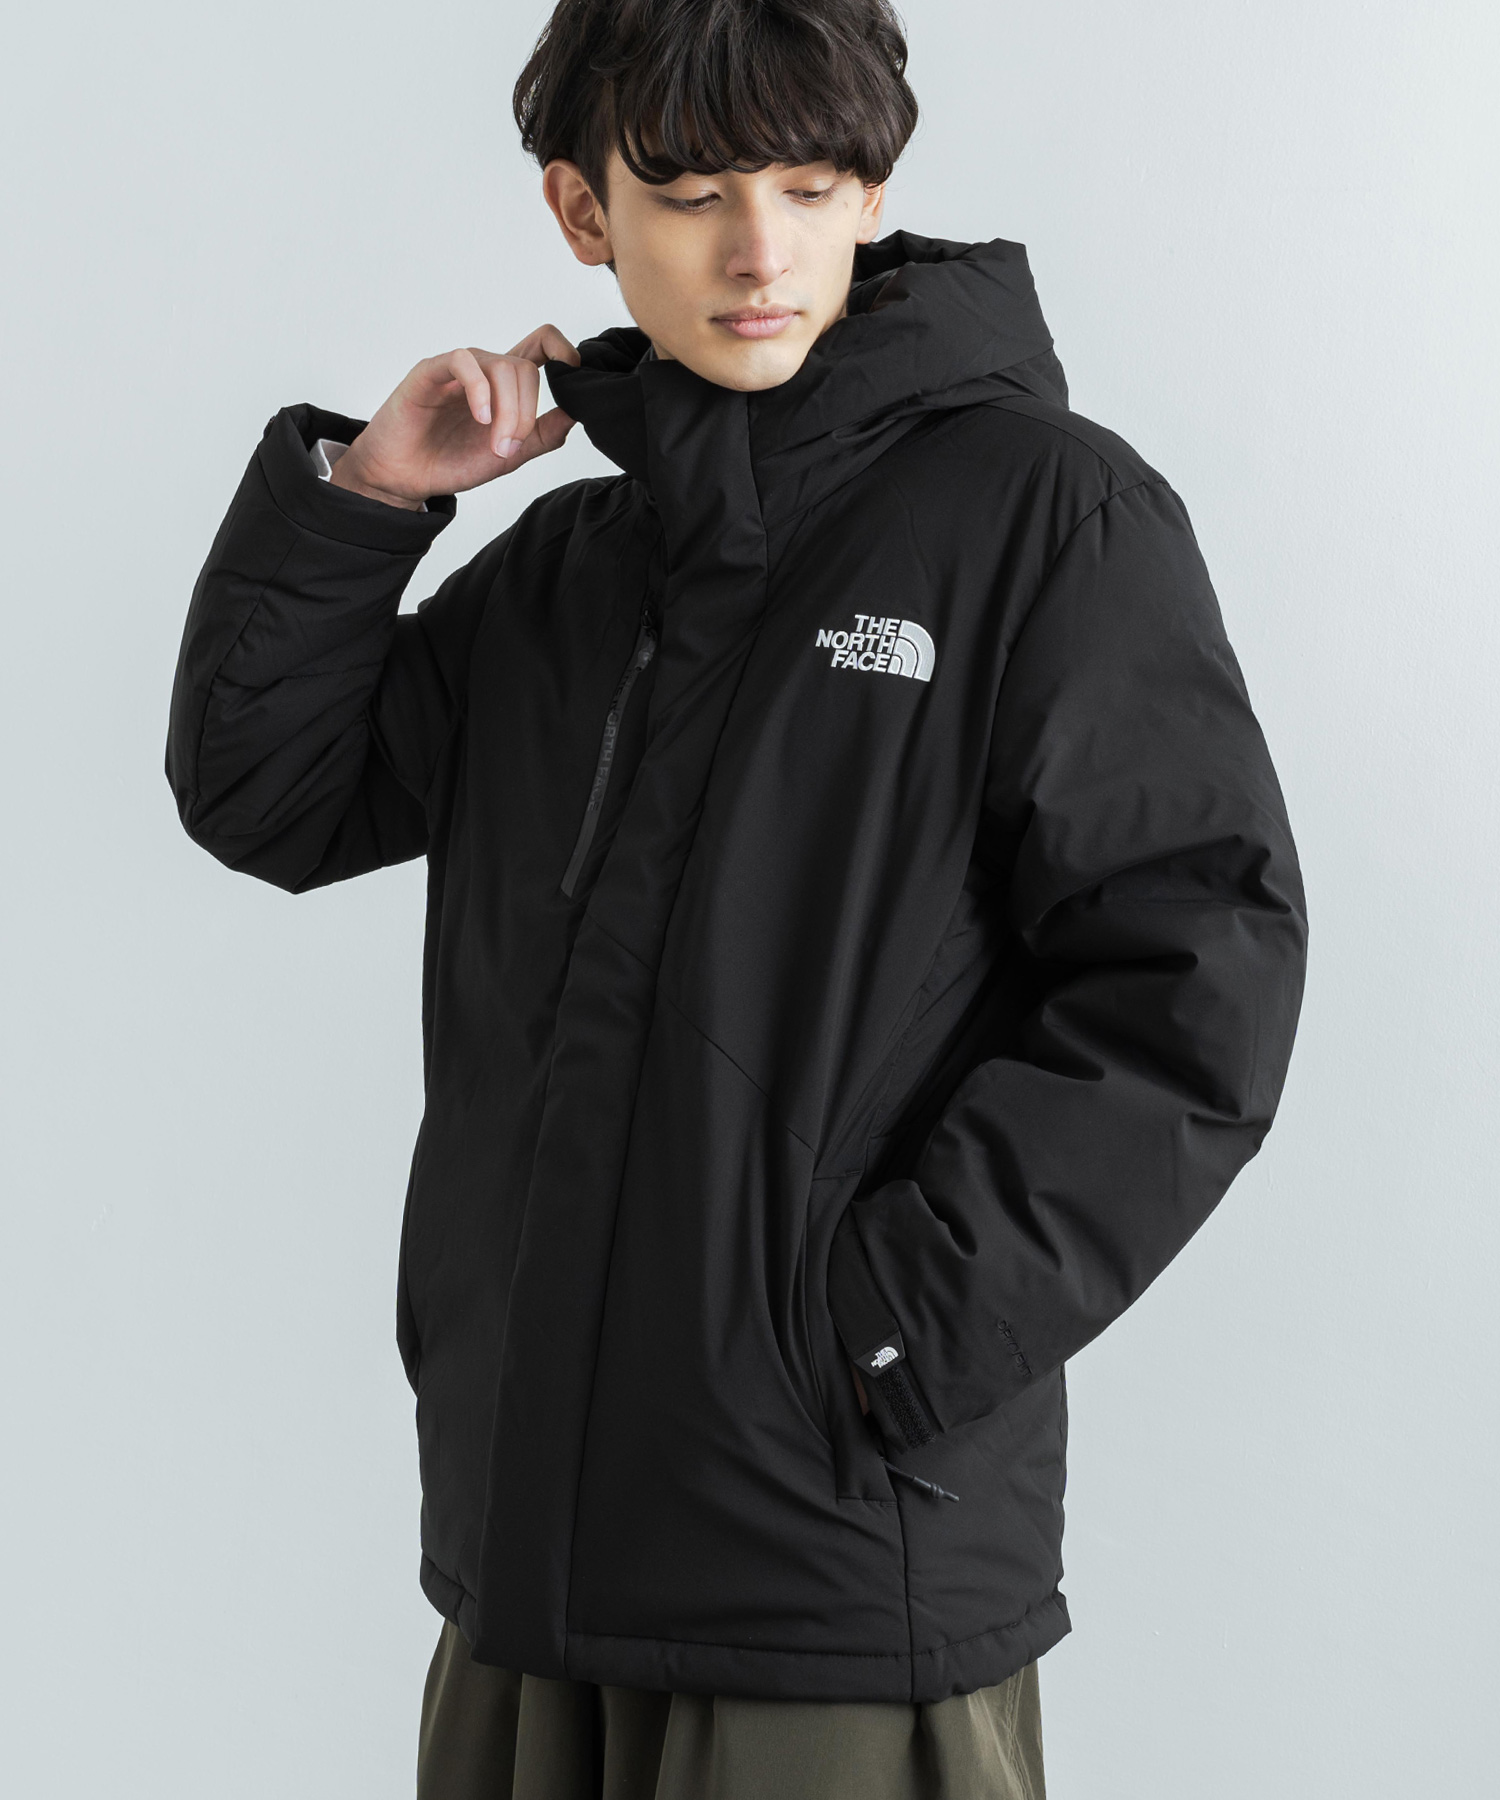 THE NORTH FACE M'S EXPLORING DOWN JKT